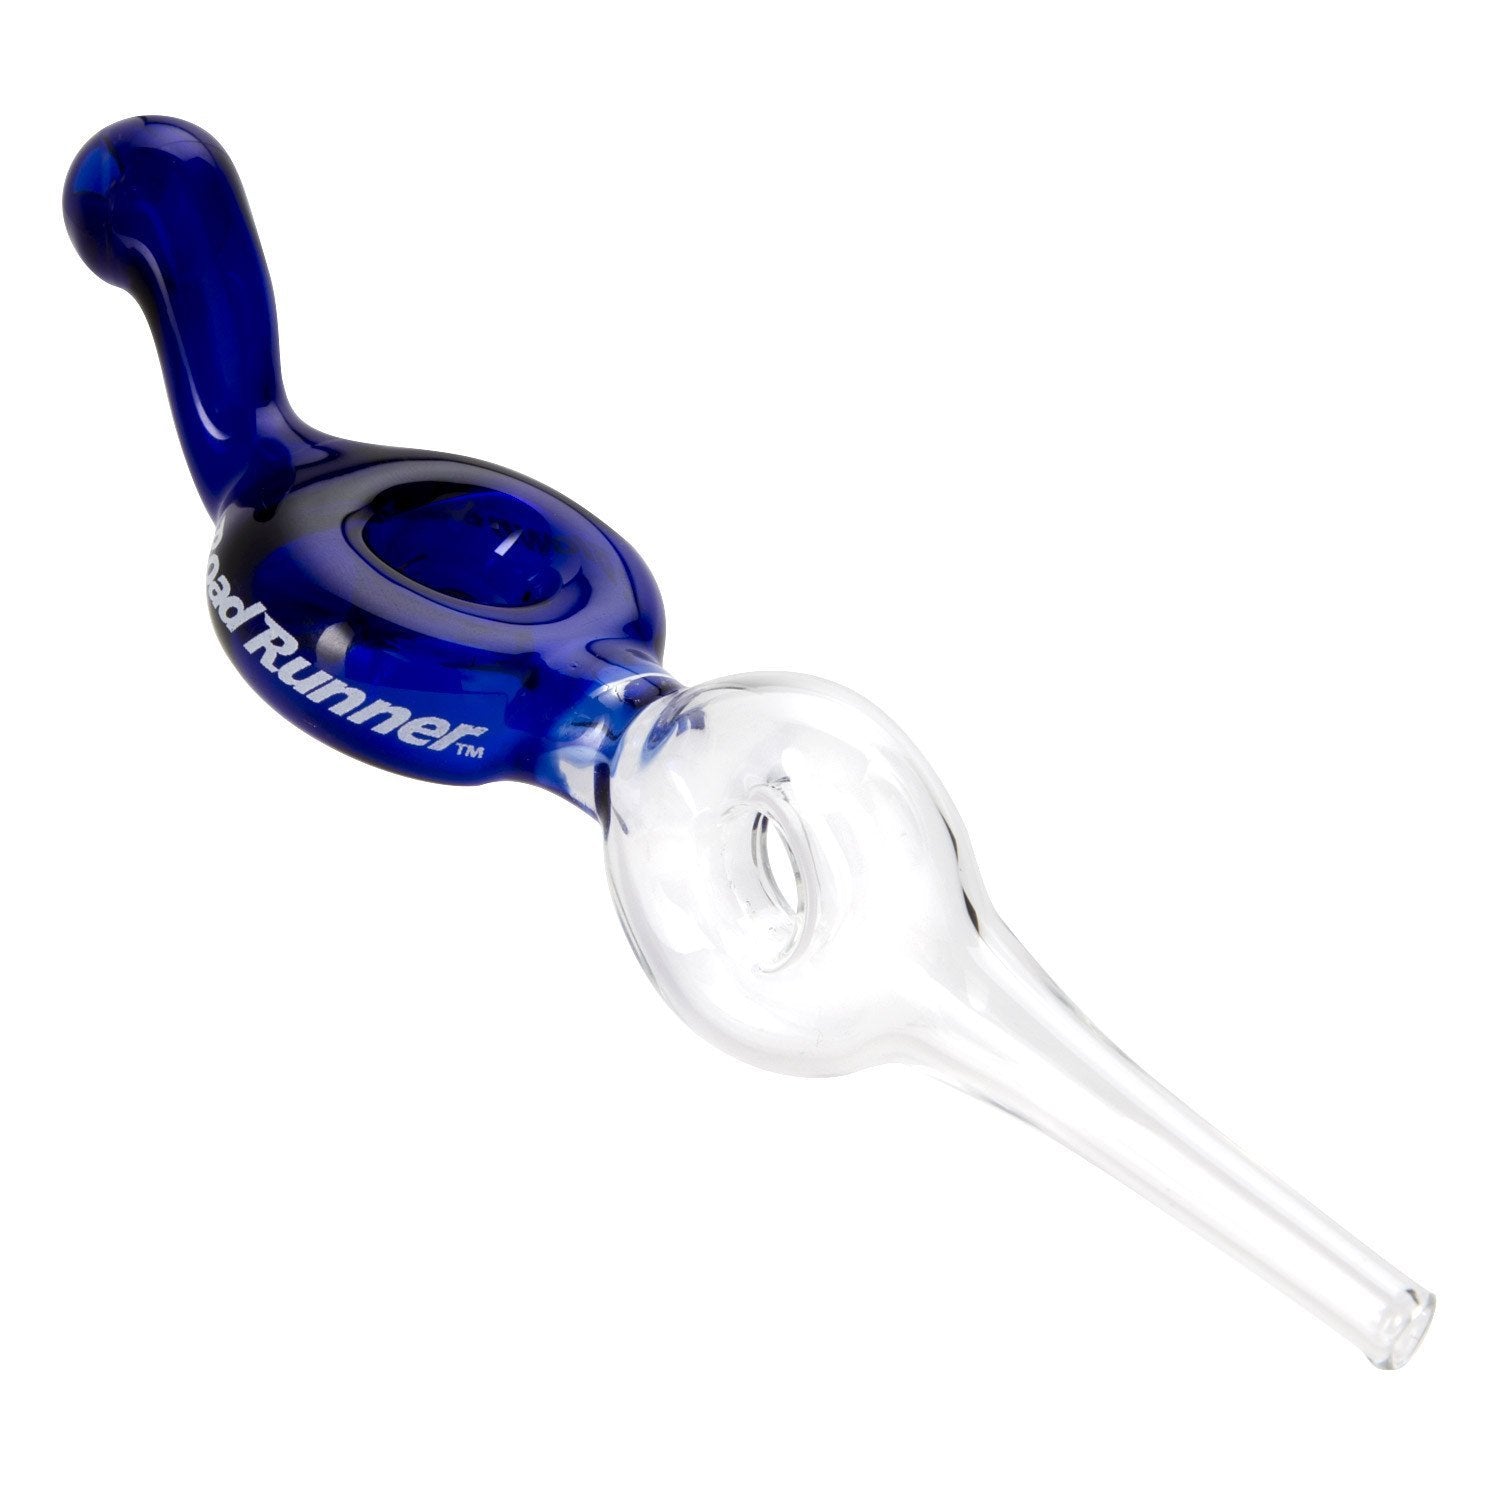 Home Blown Glass Road Runner Air-Cooled Dab Straw / $ 49.99 at 420 